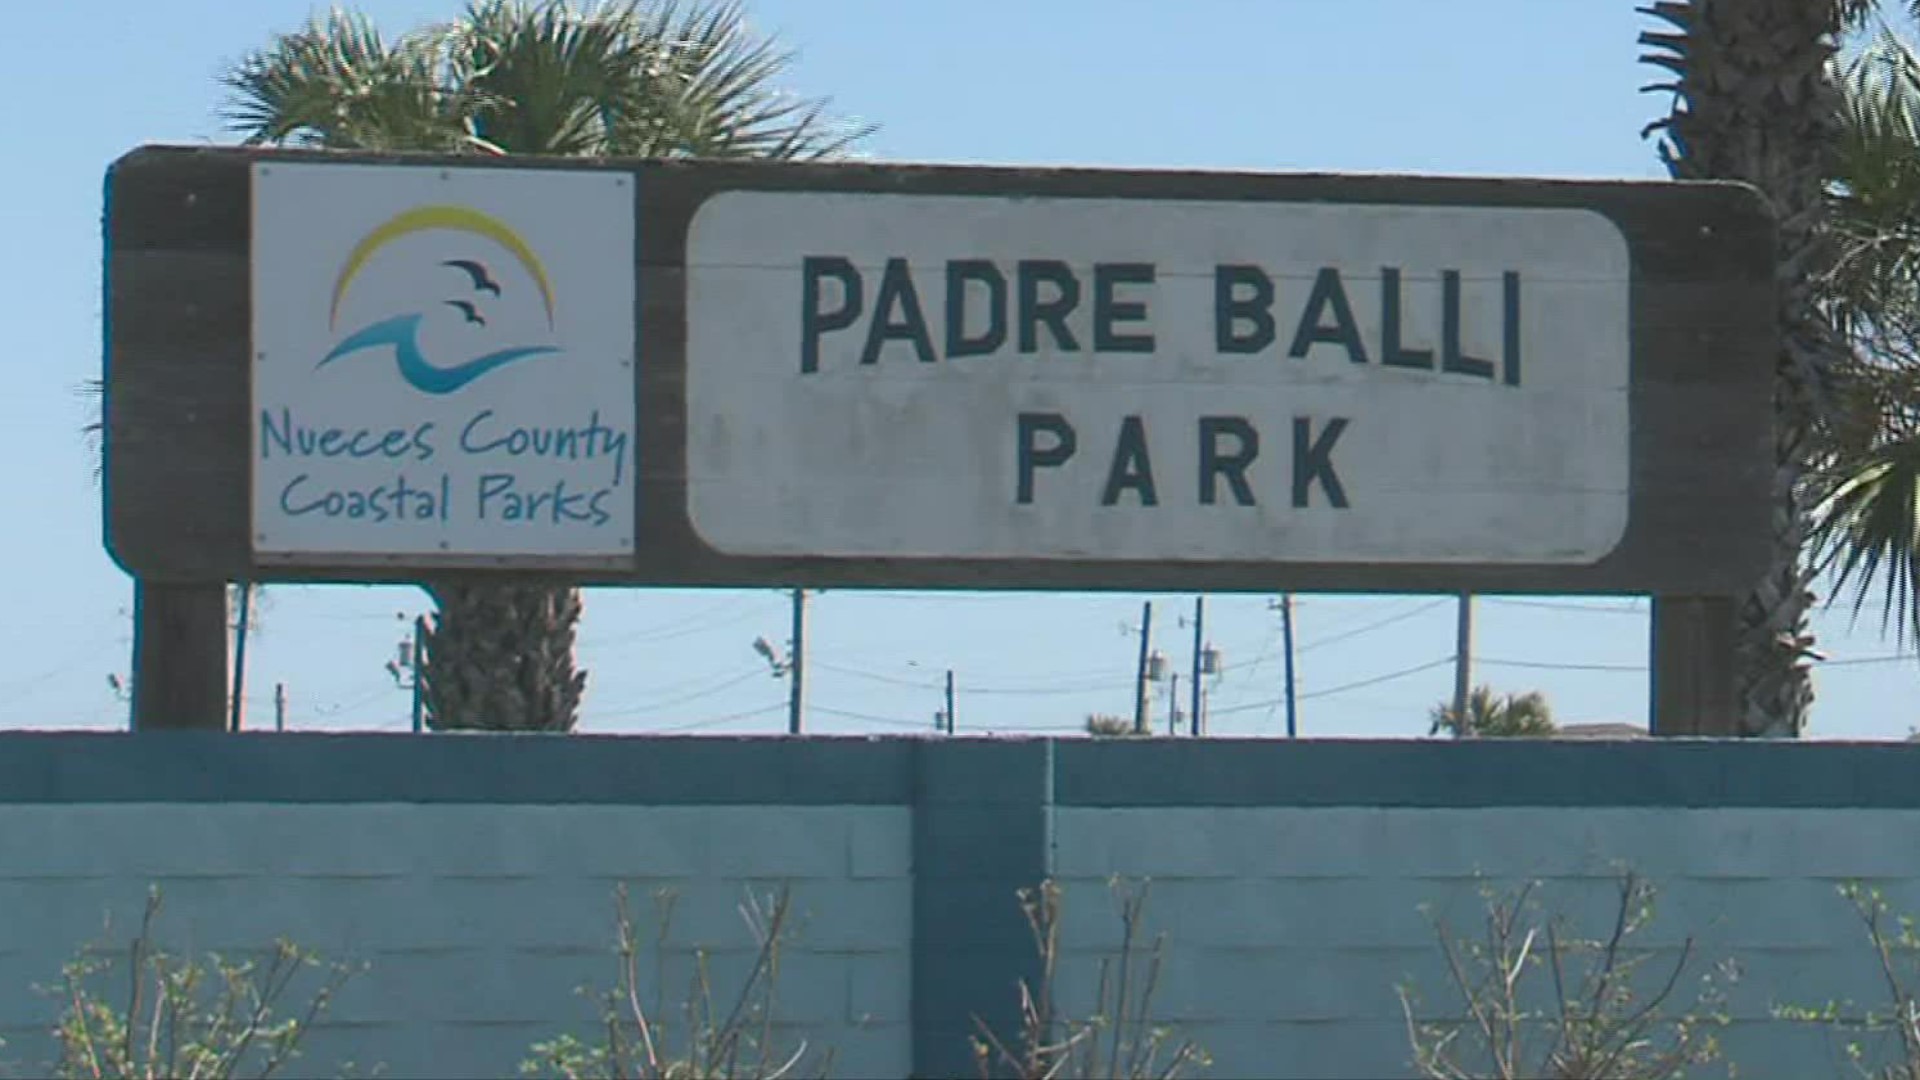 Nueces County Judge Barbara Canales says she believes that over the next week any remaining issues over Padre Balli Park will be solved.